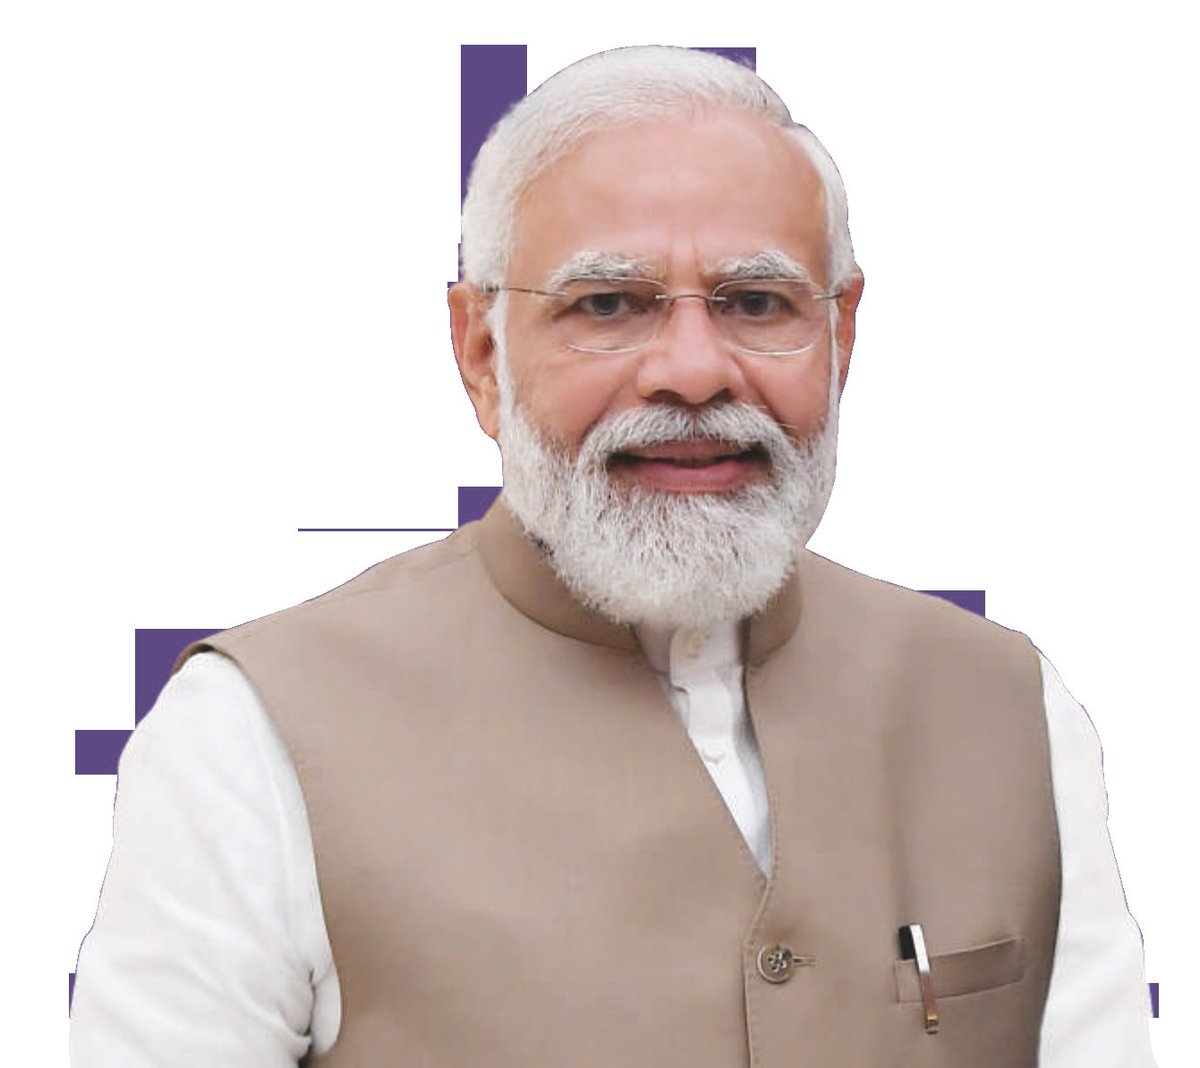 'Under PM Modi's visionary leadership, BJP continues to steer India towards unprecedented progress and unity, igniting hope and opportunity in every corner of the nation. #BJP #NarendraModi #TransformingIndia'